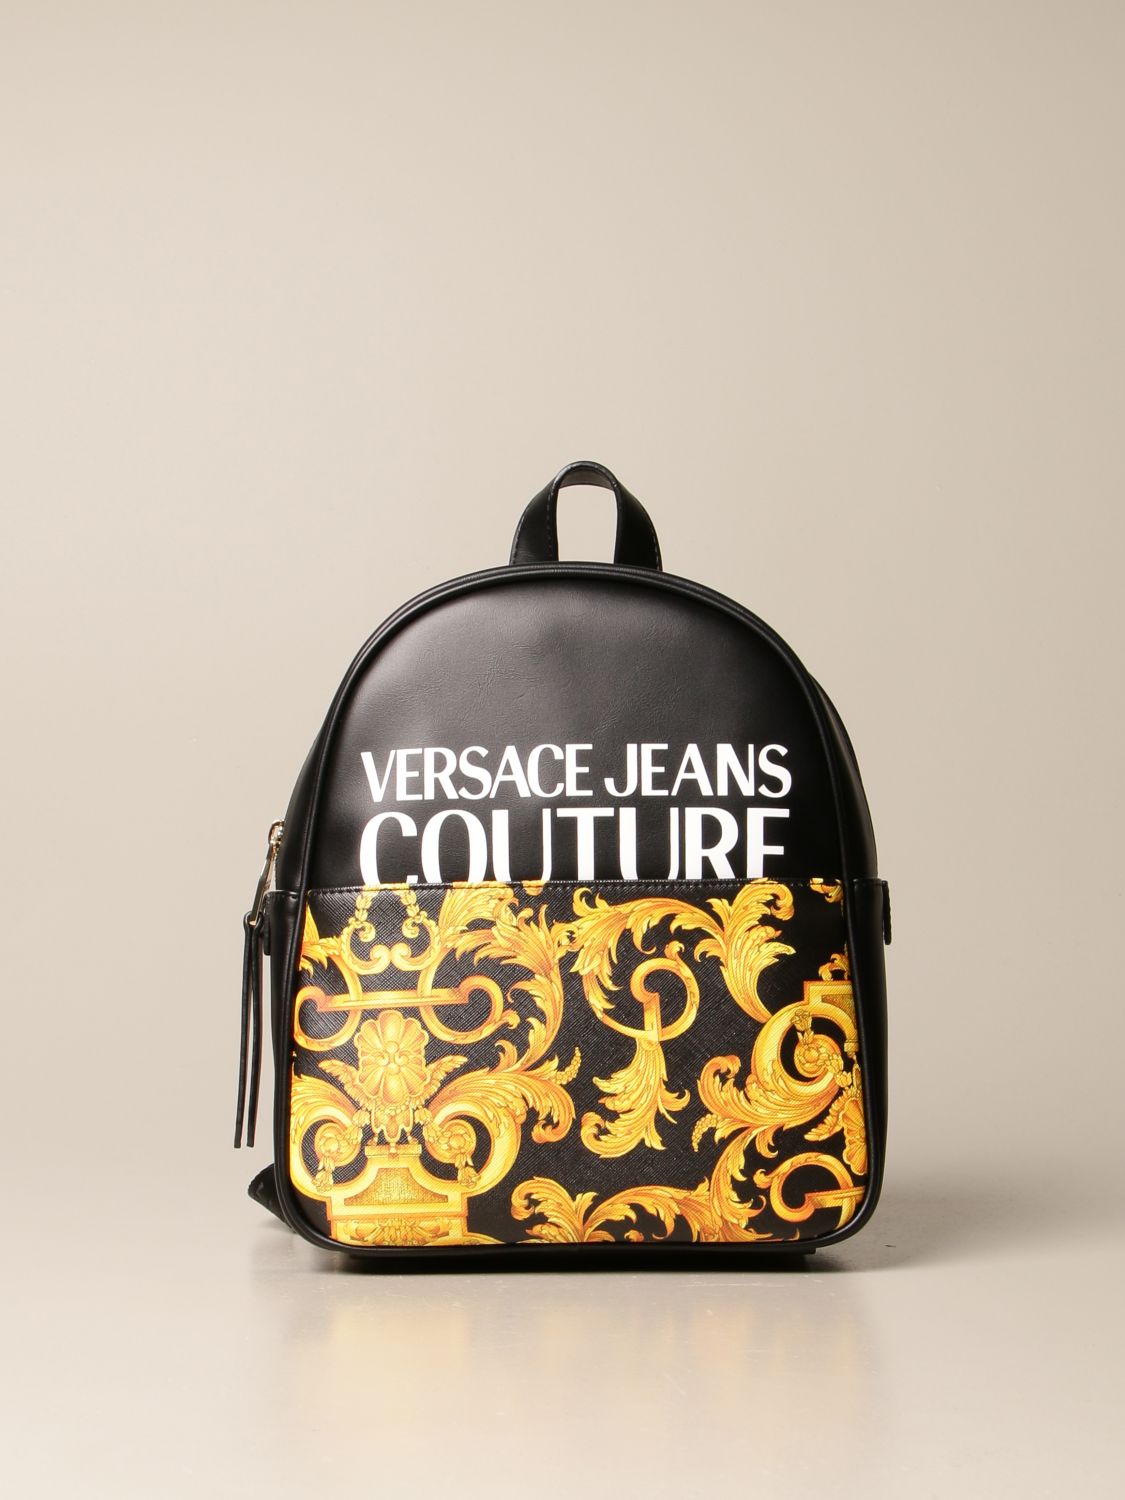 versace jeans couture backpack